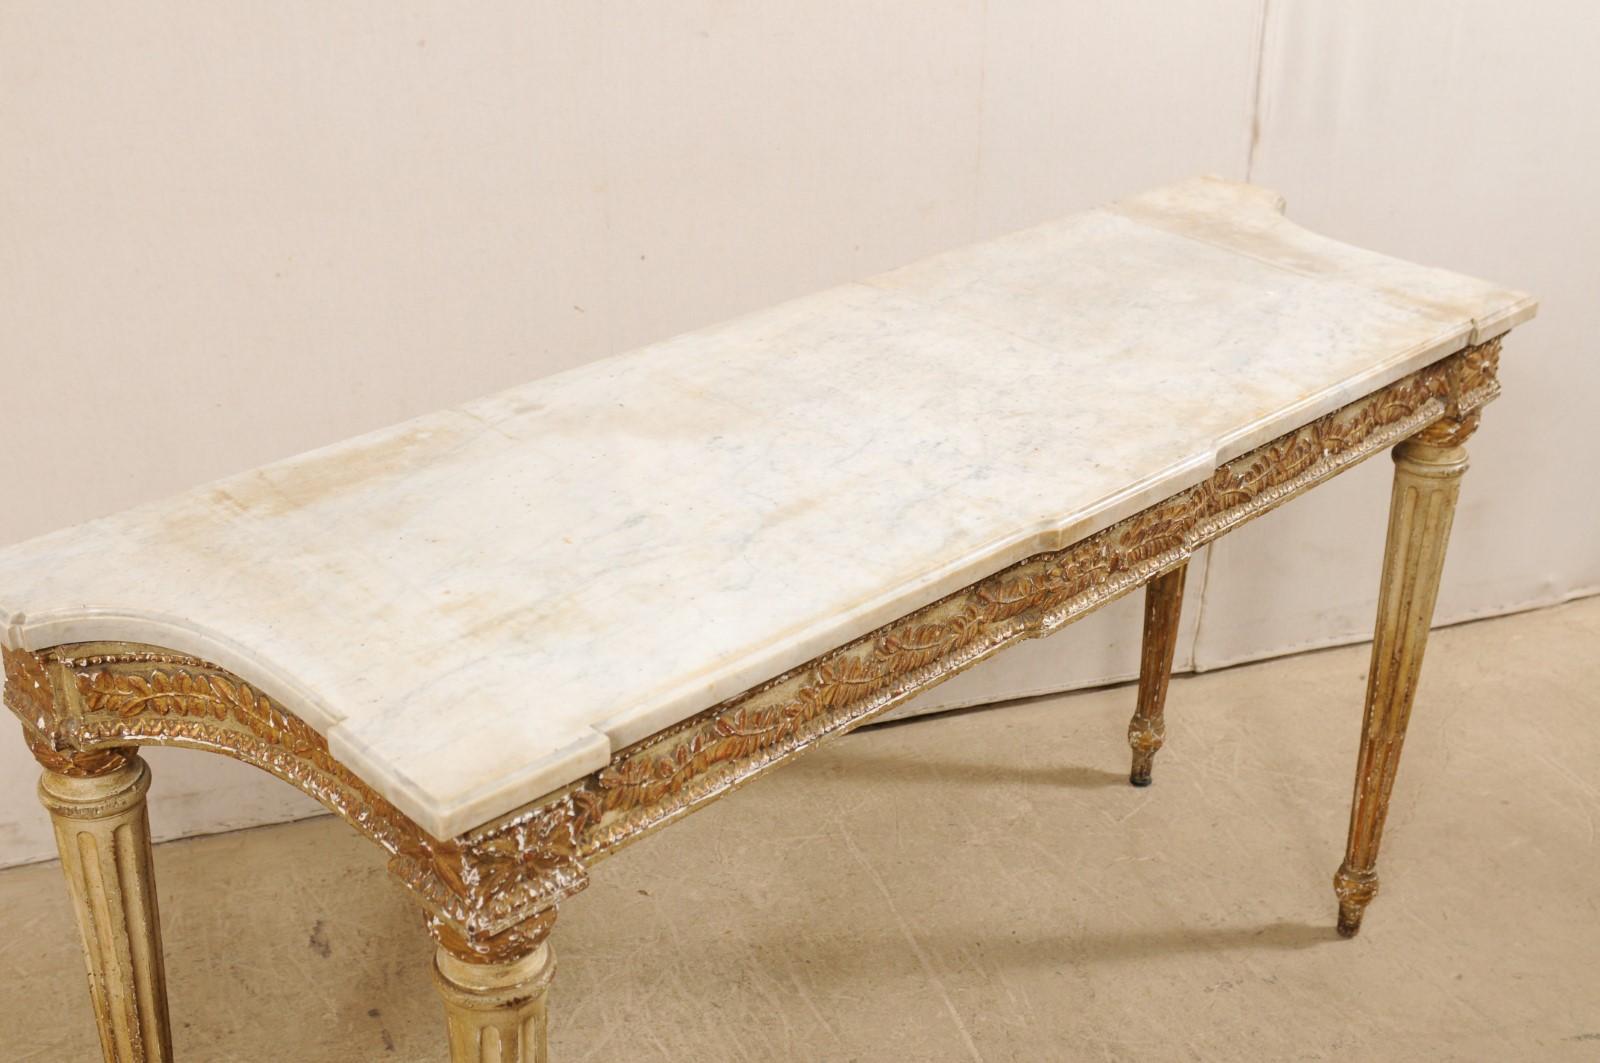 19th Century French Carved Wood Slender Console Table with Marble Top and Fluted Legs